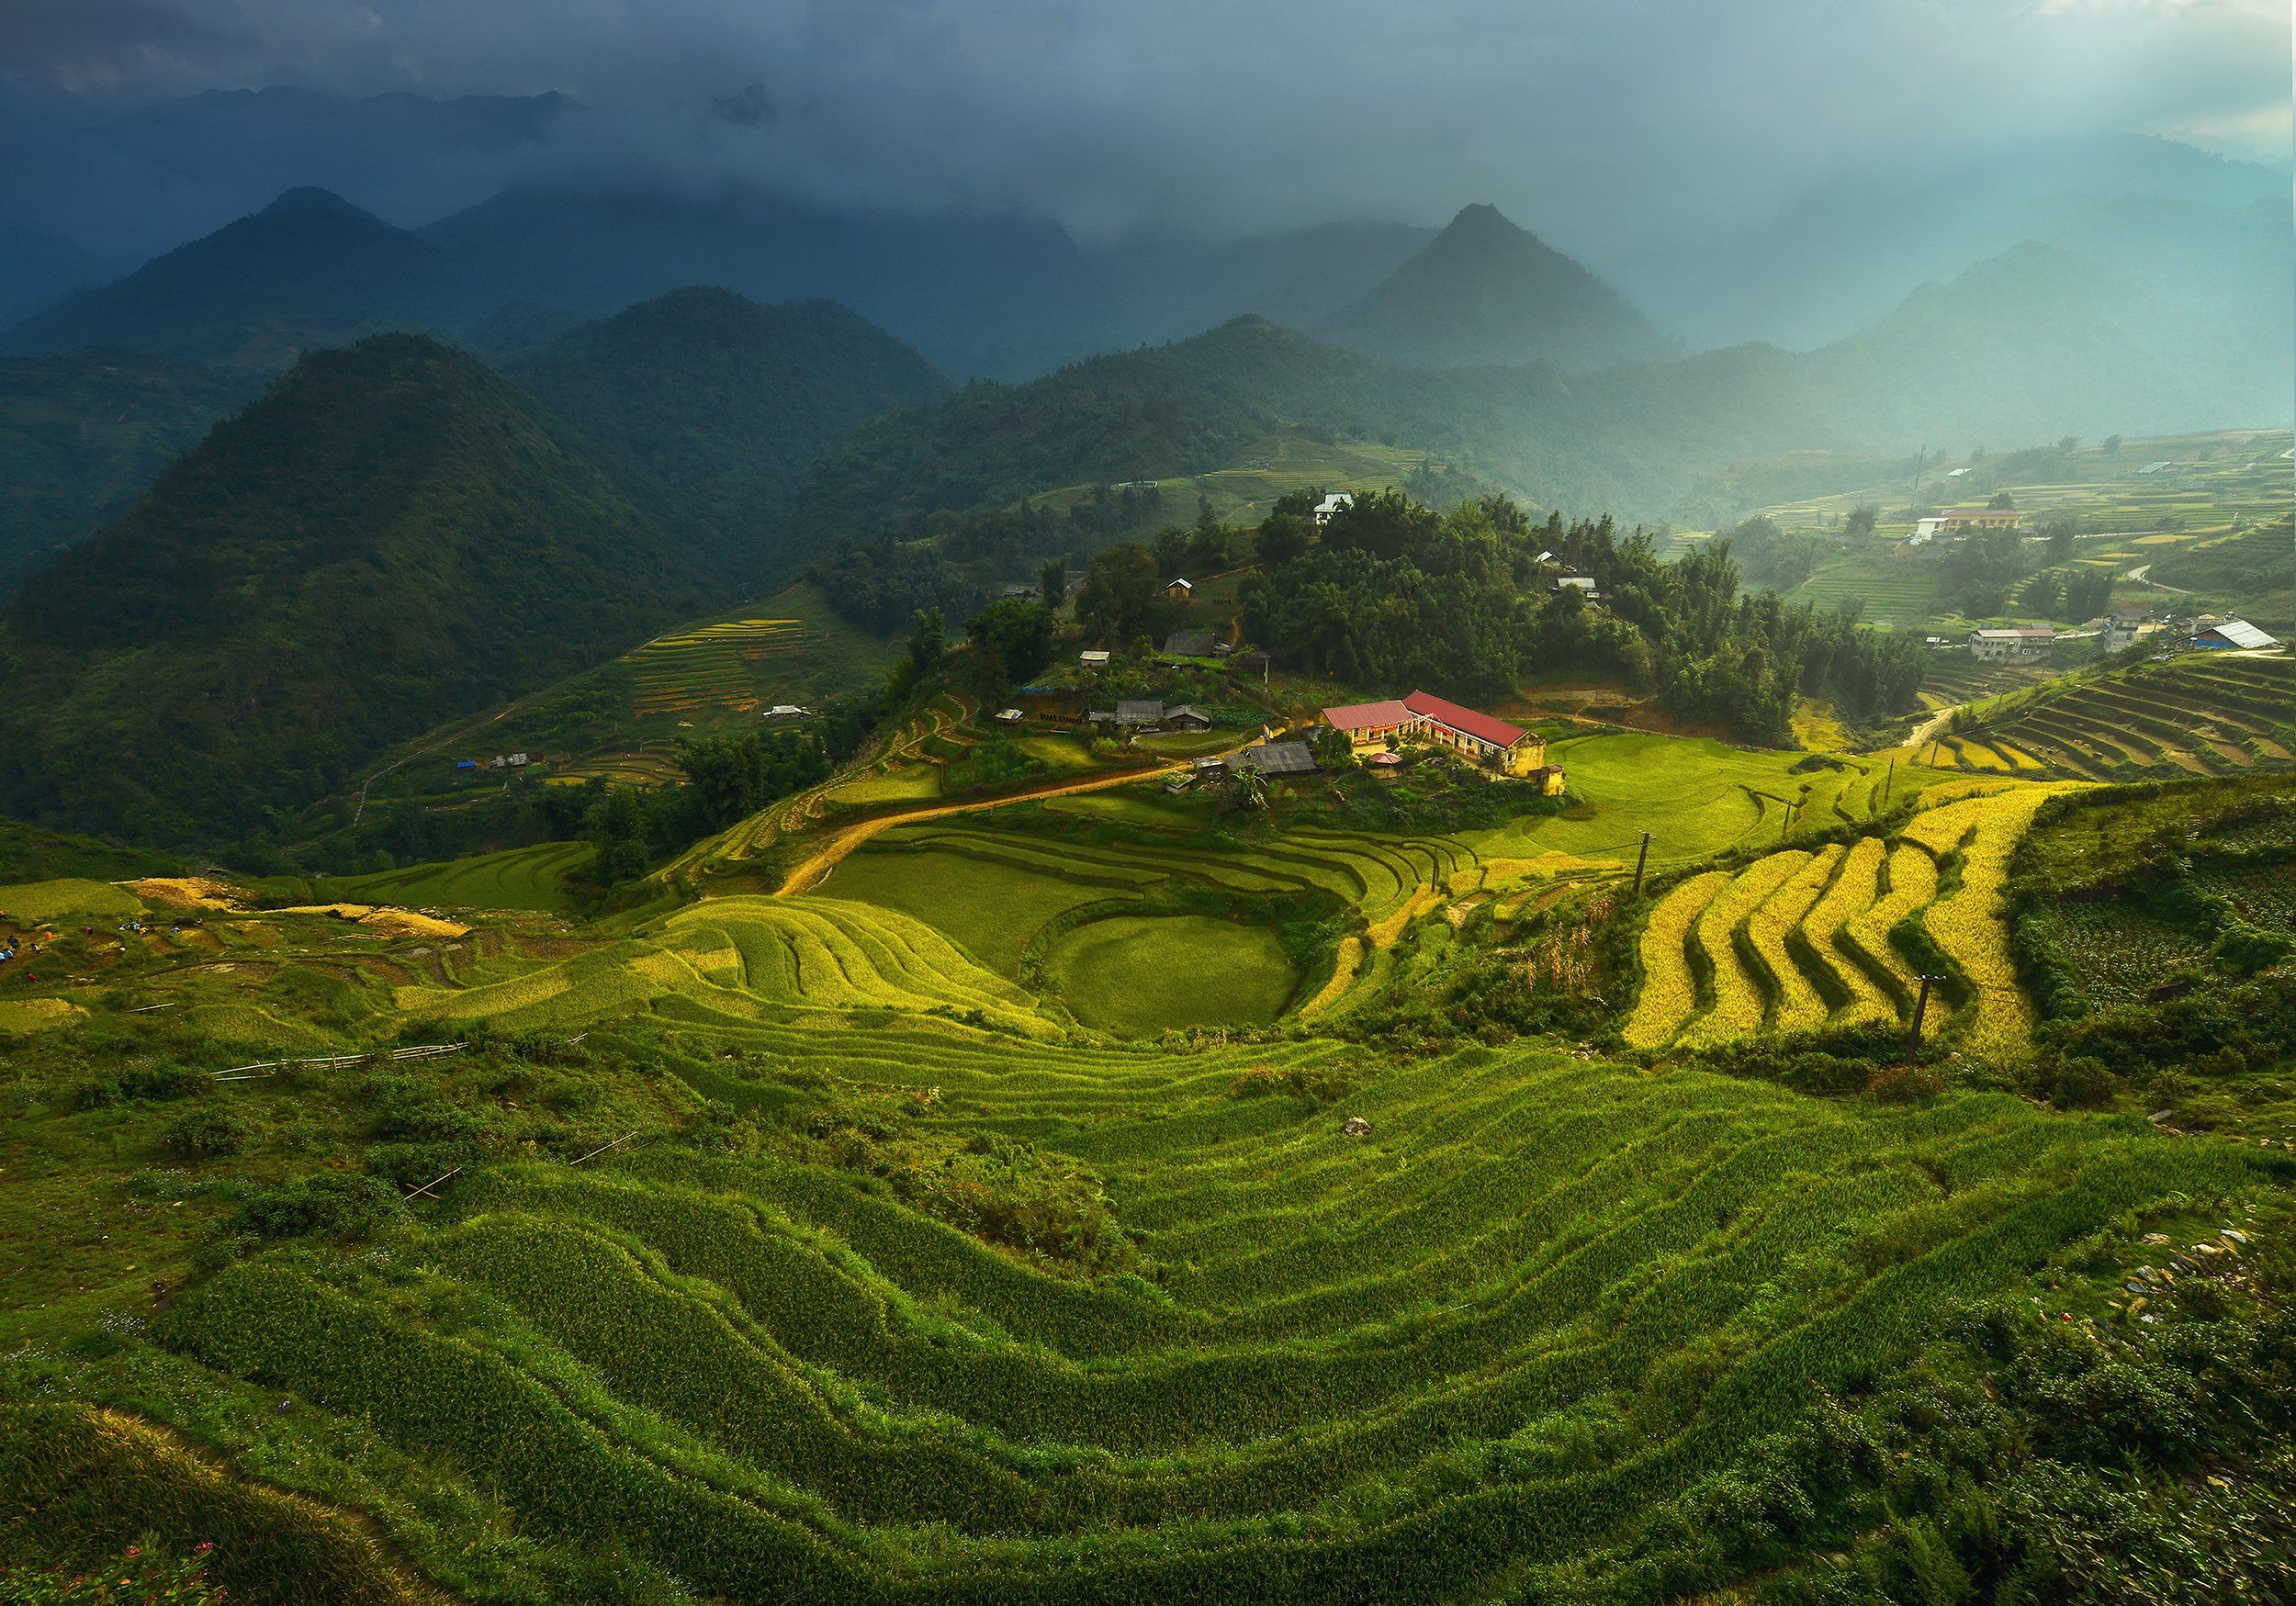 Agriculture, Beauty In Nature, Color Image, Day, Green Color, Harvesting, Horizontal, No People, Outdoors, Photography, Rice - Cereal Plant, Rice Paddy, Terraced Field, Travel Destinations, Vietnam, sarawut intarob